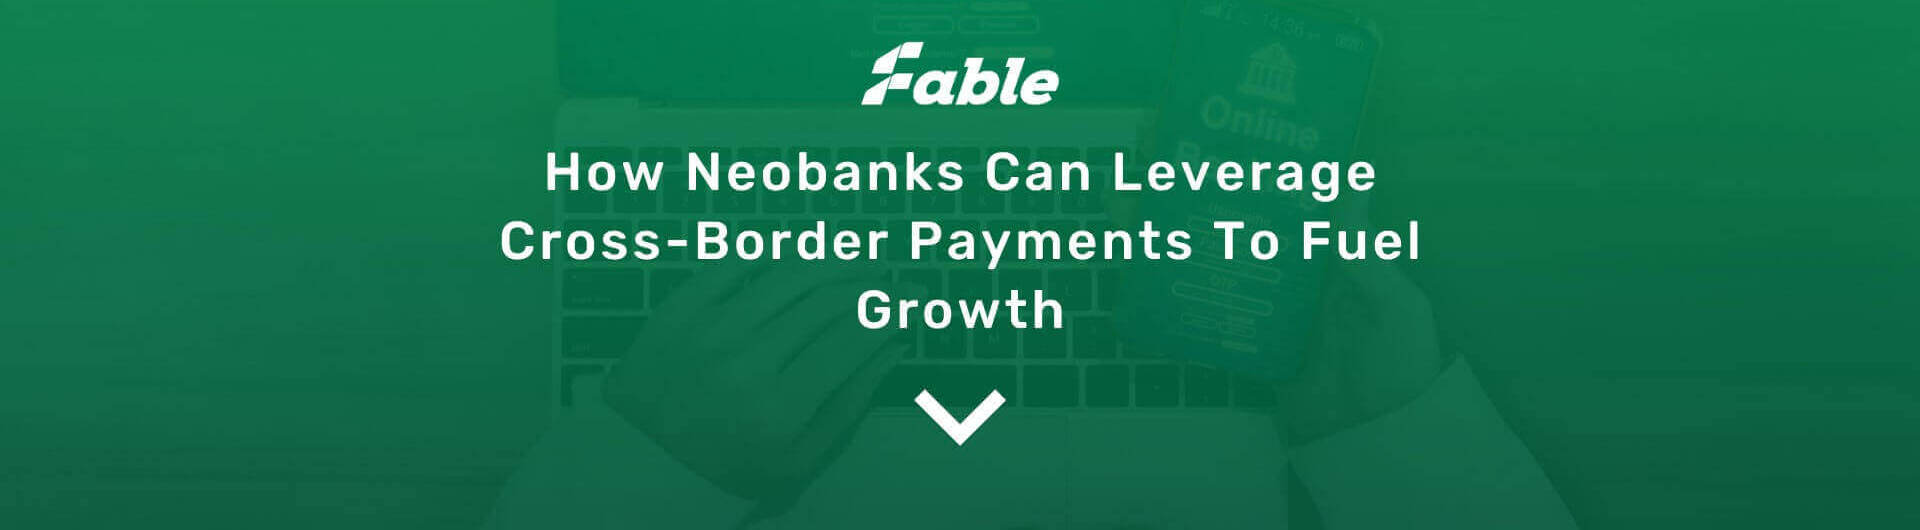 How Neobanks Can Leverage Cross-Border Payments To Fuel Growth